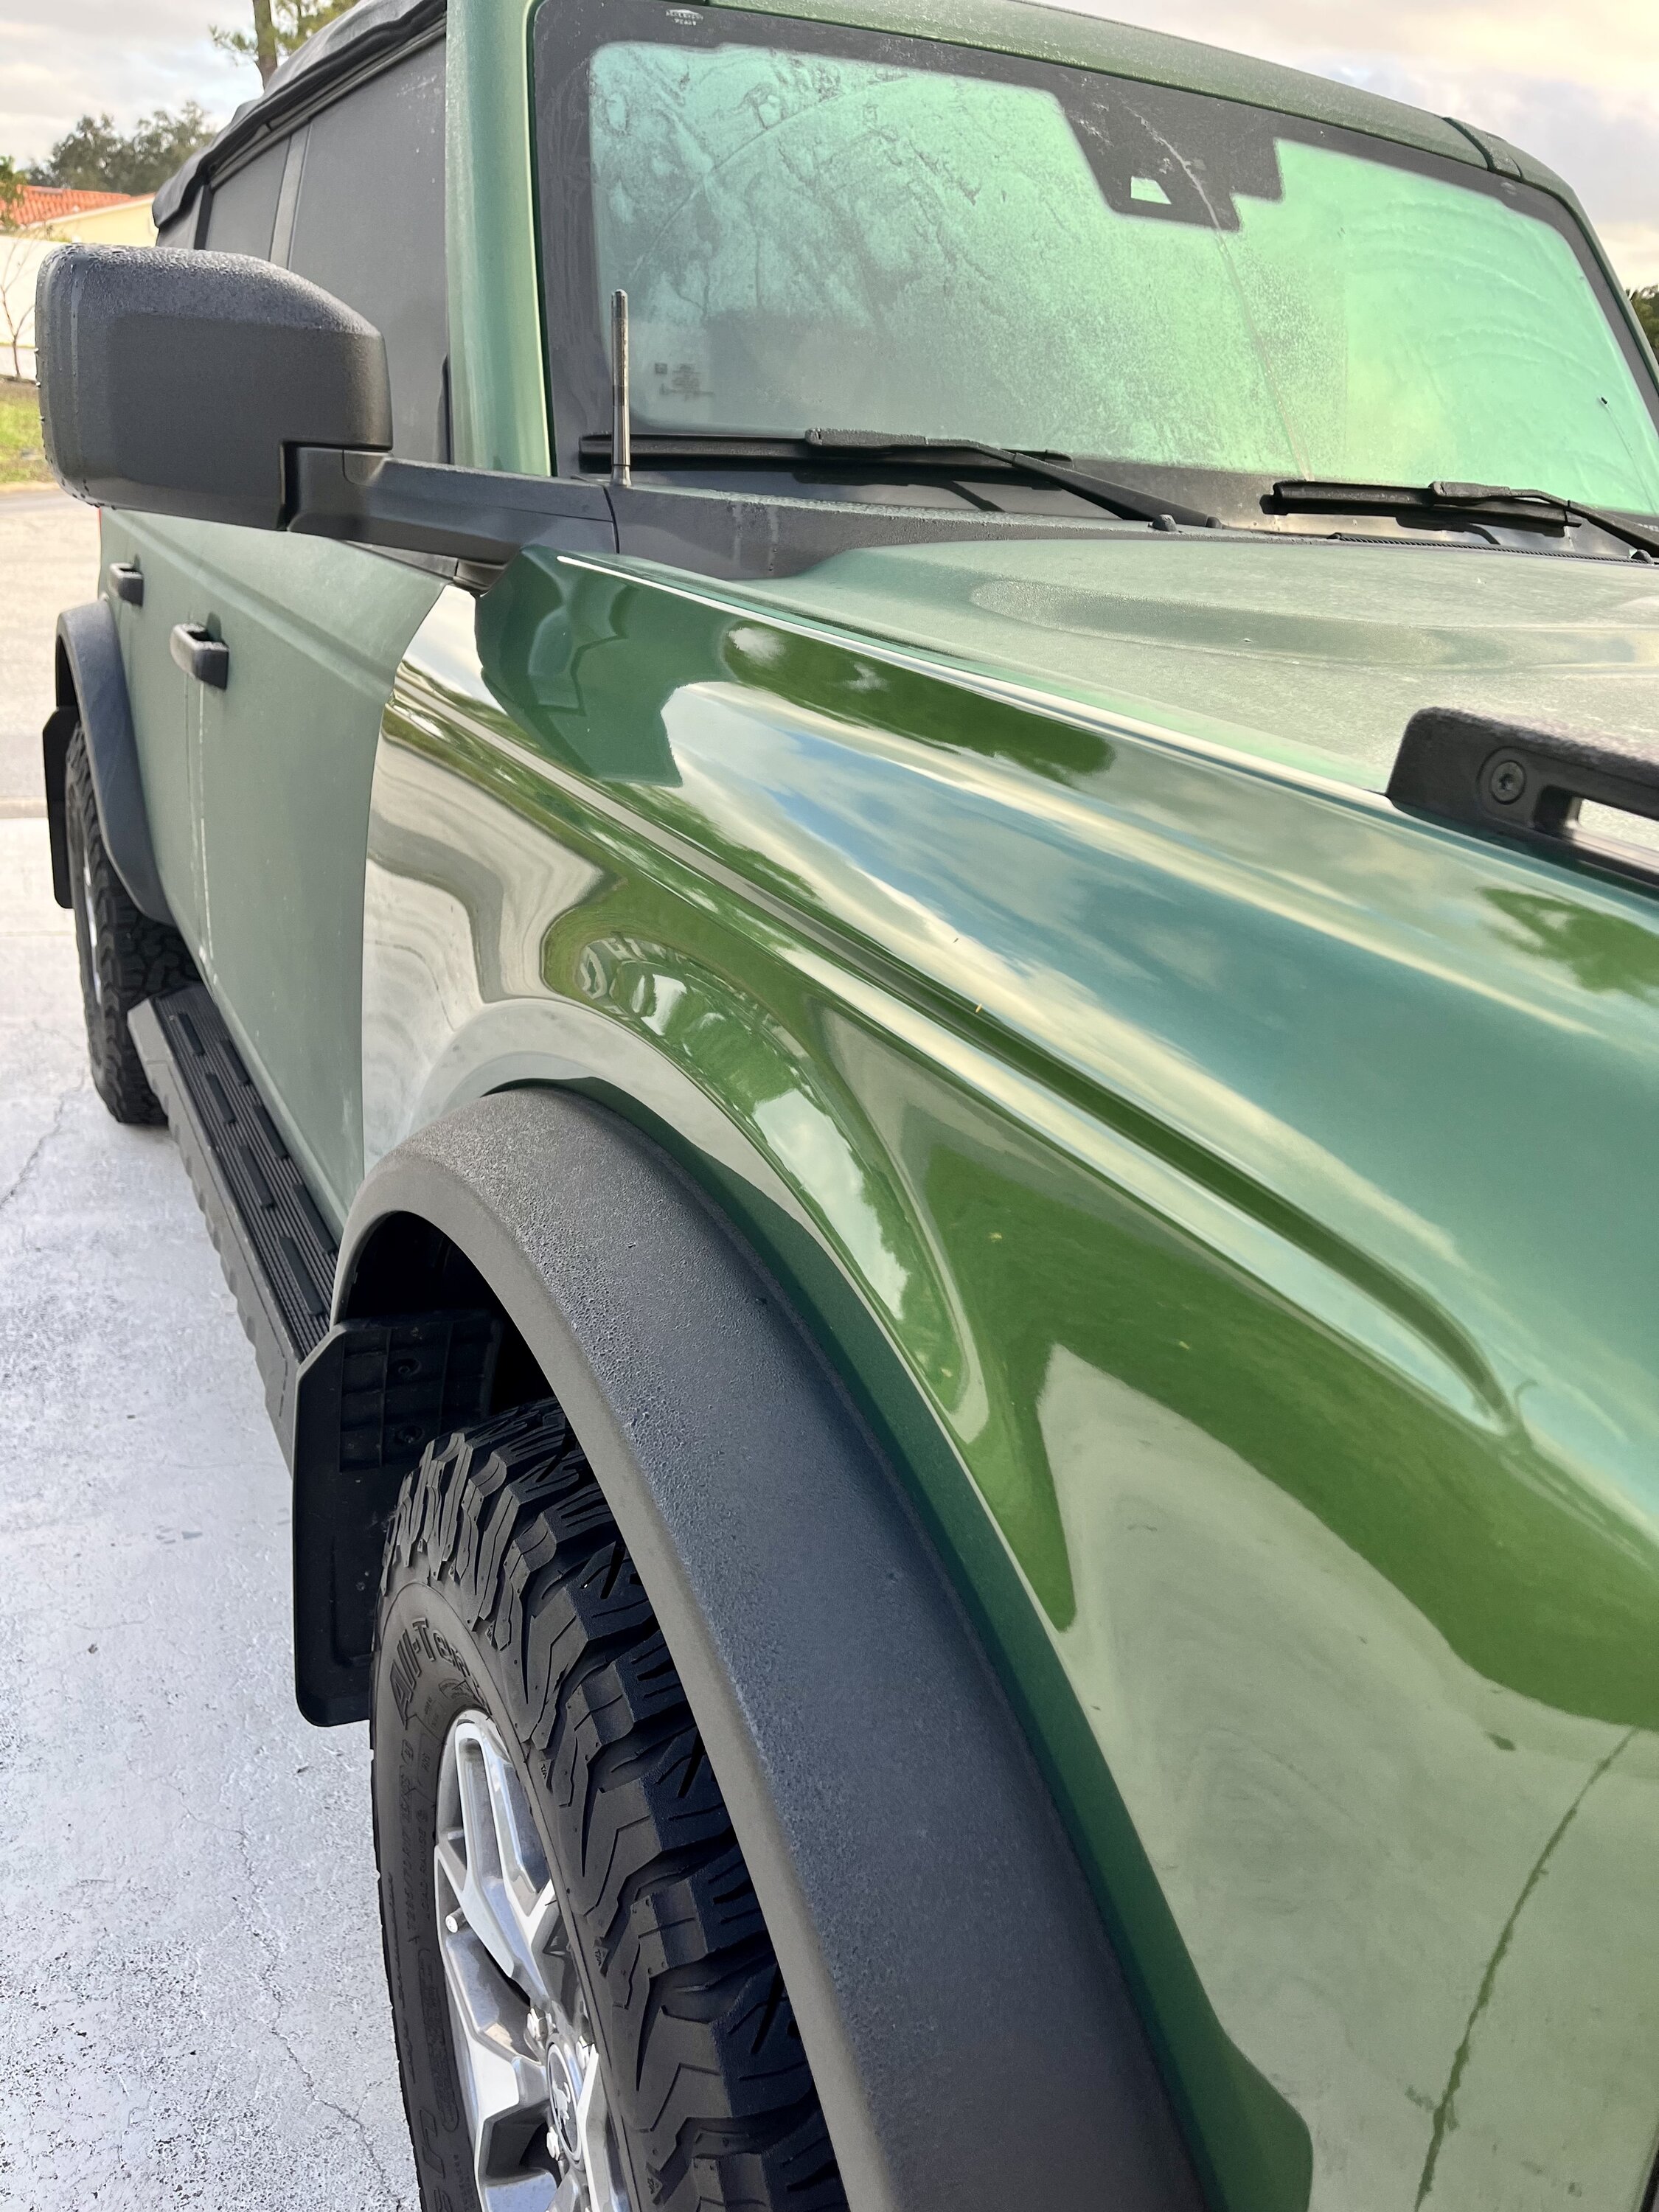 Ford Bronco Mildly Interesting: morning condensation not on either front panels 07AA0532-8F5F-4D9E-9137-347012C6B46F